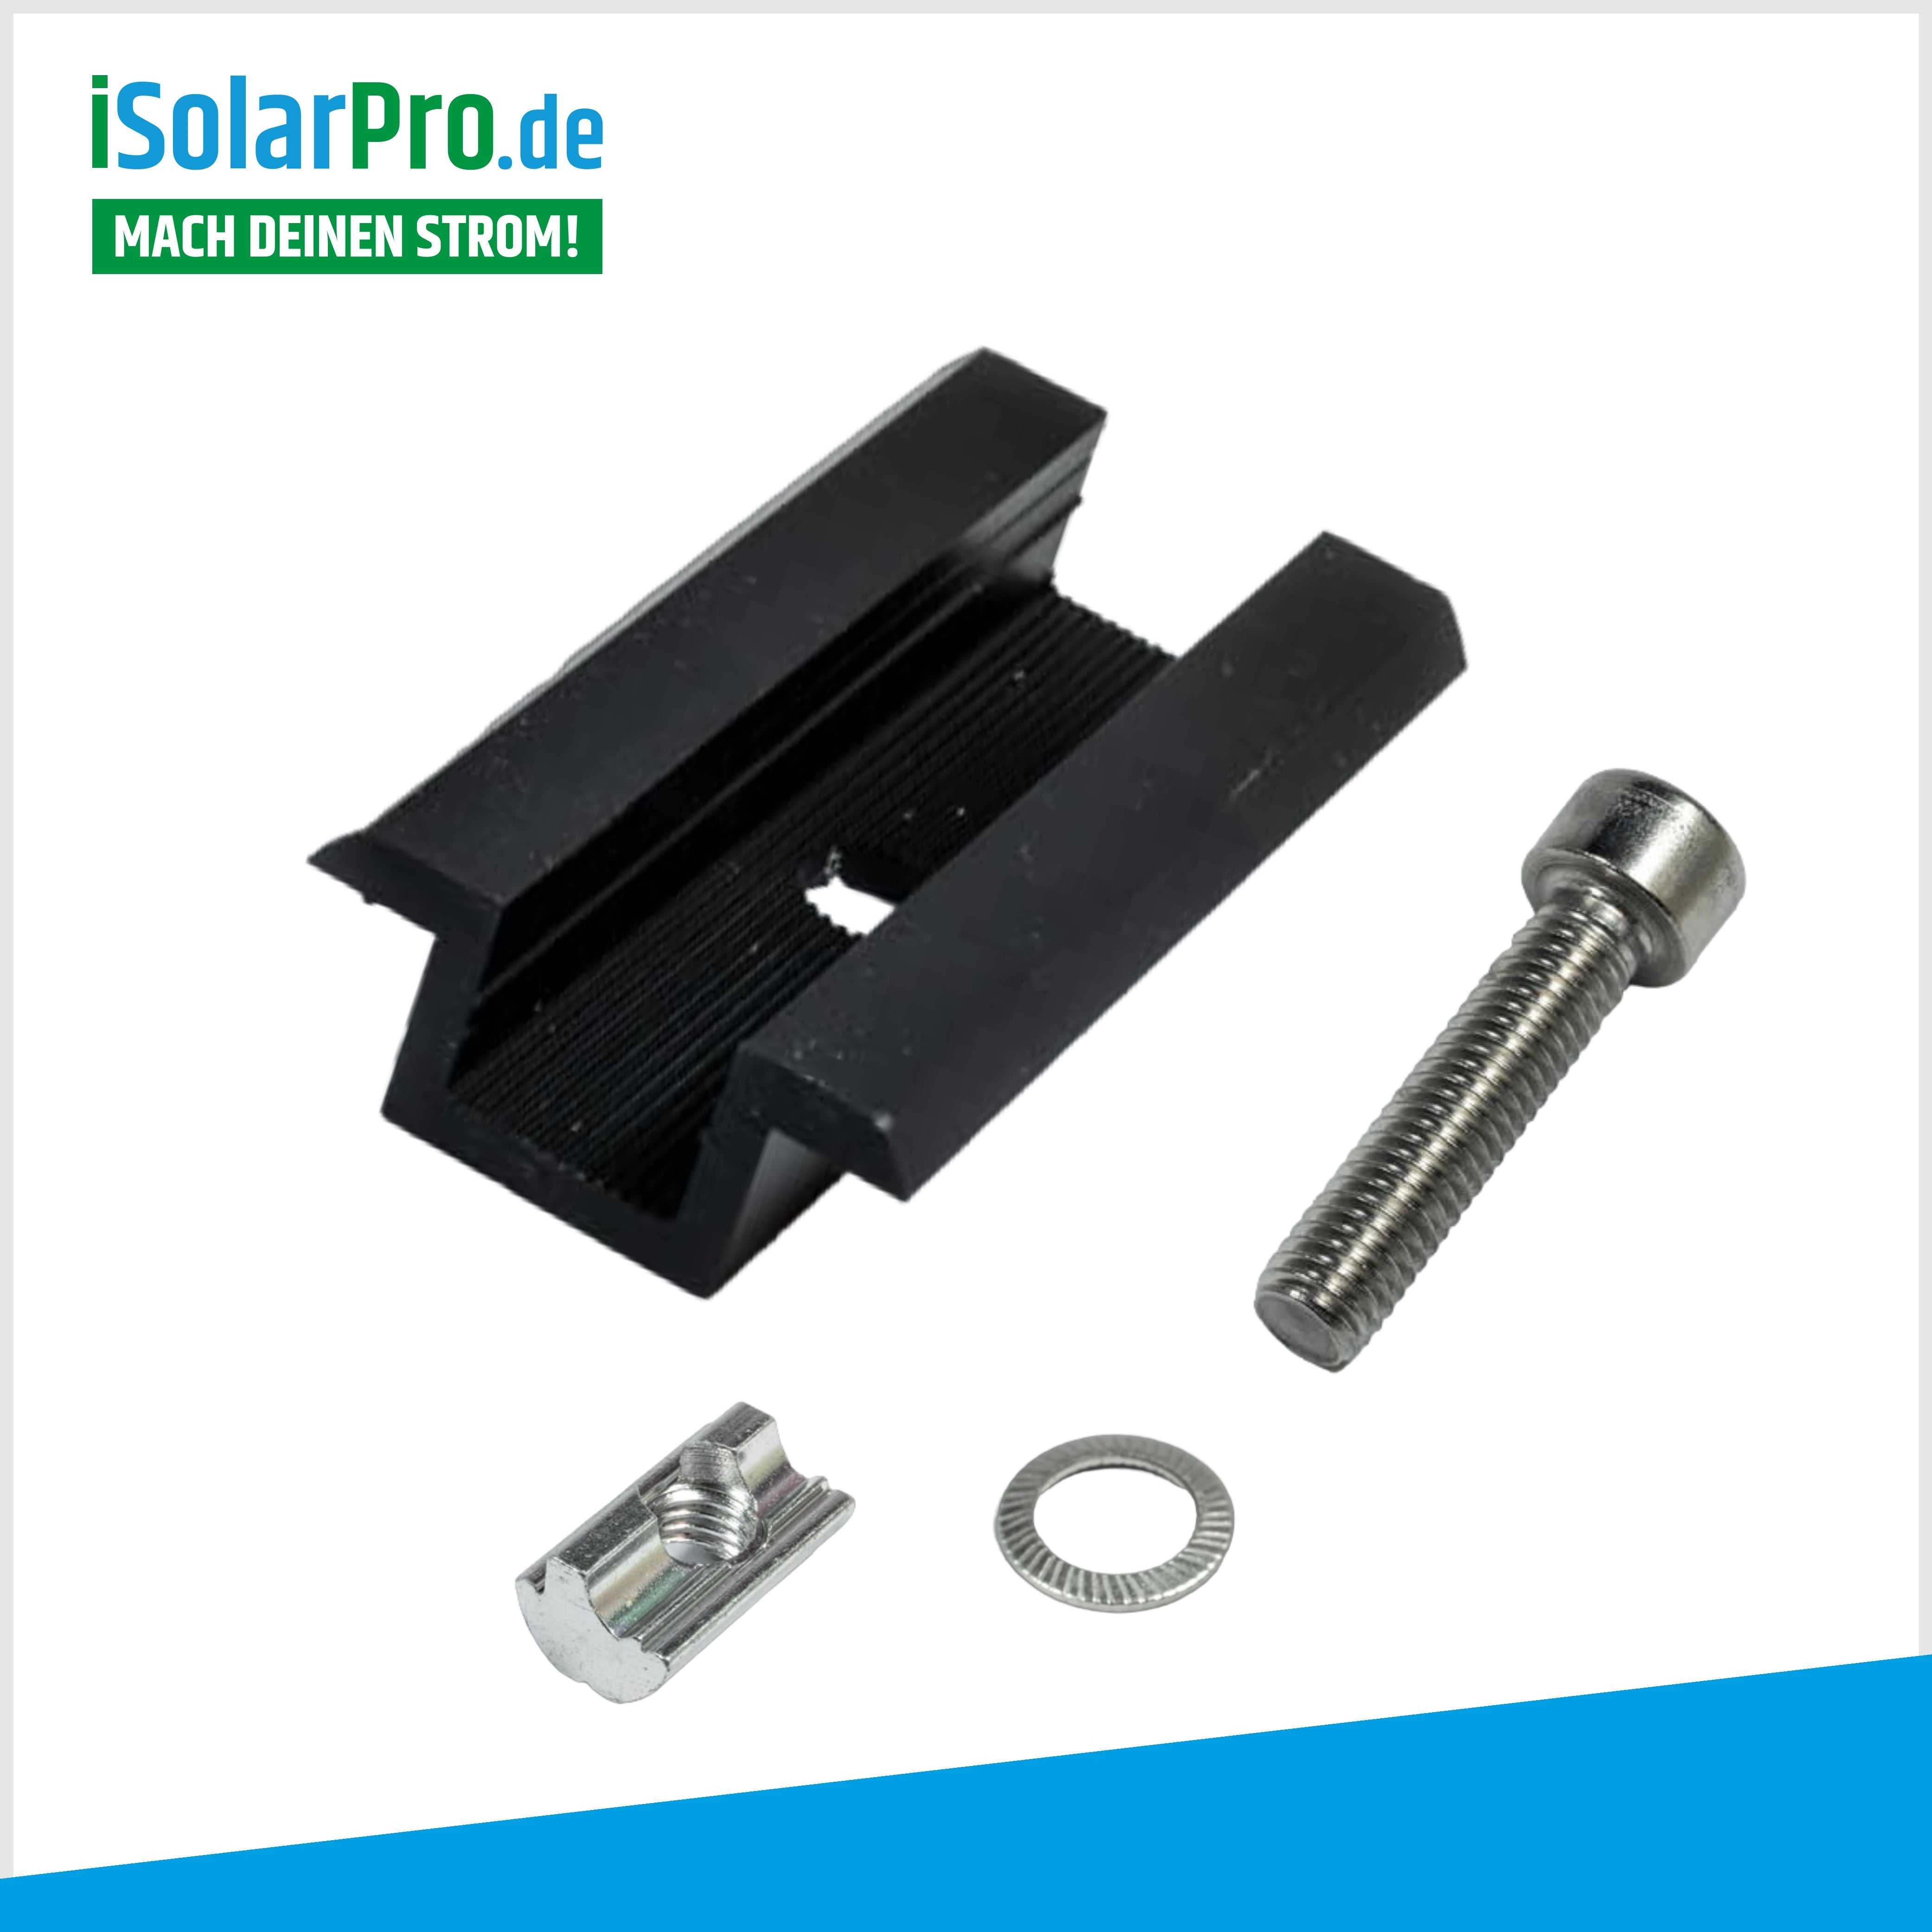 30/35/40mm middle clamps ALU black for solar modules, photovoltaic PV mounting 